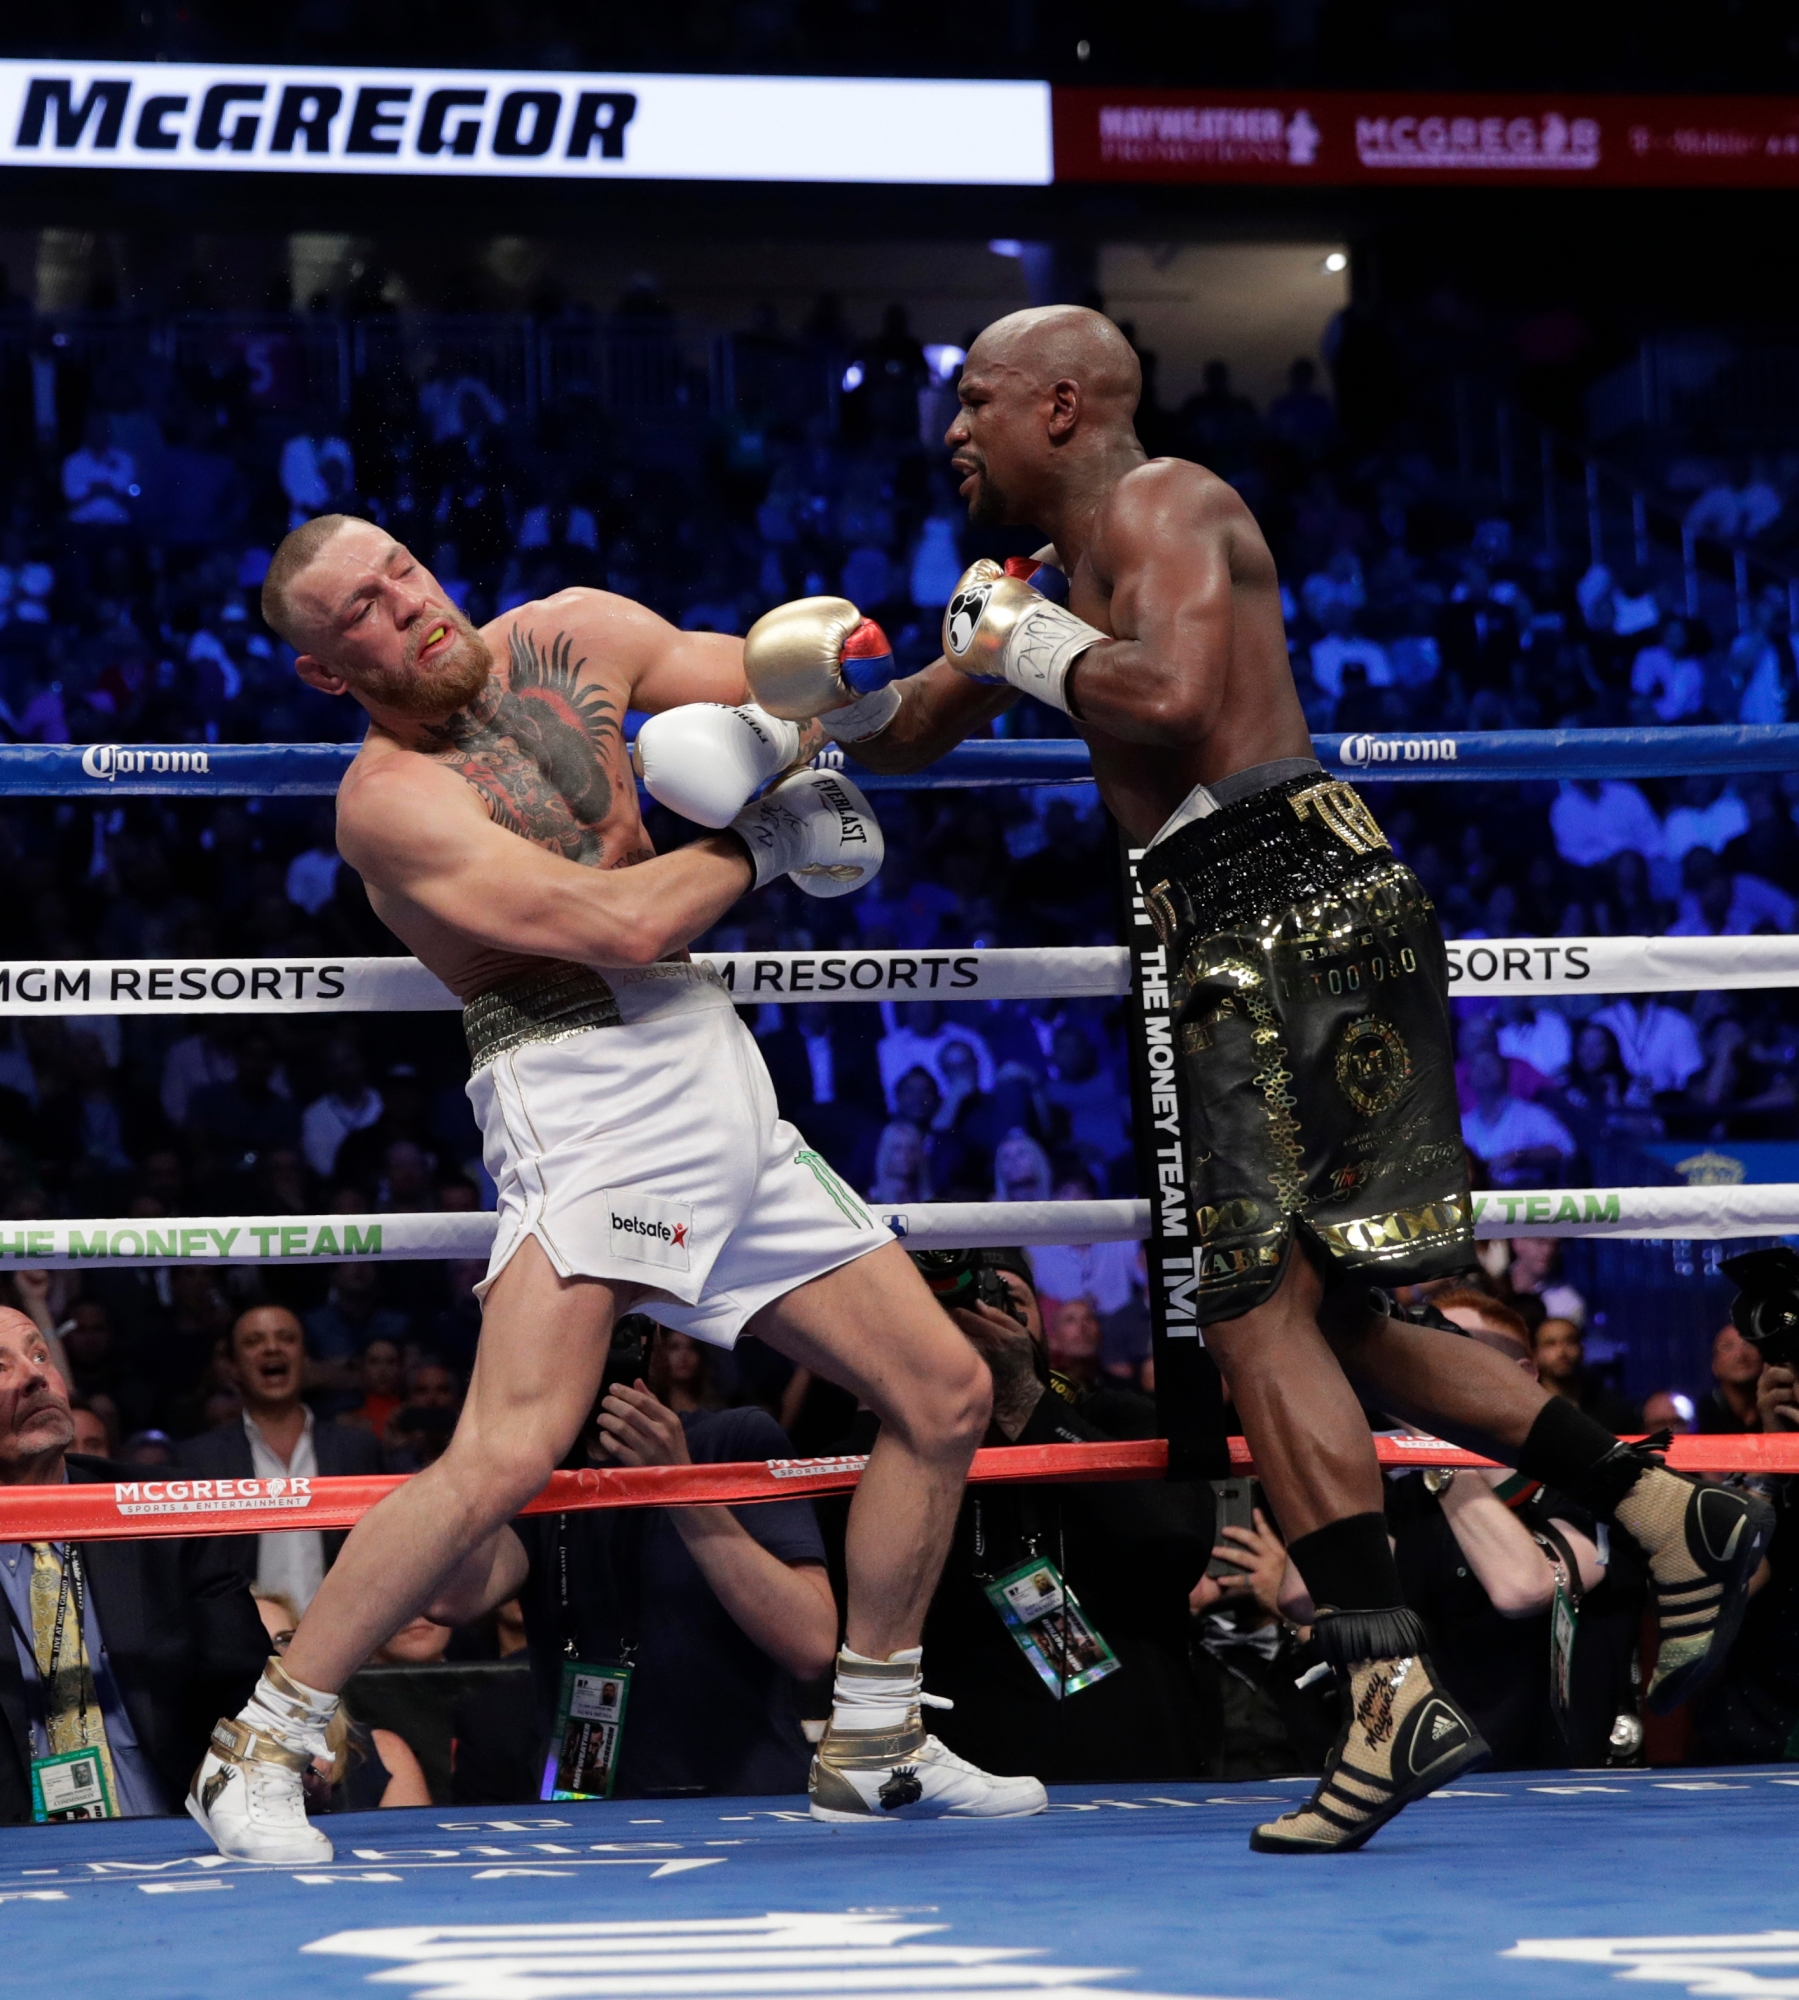 Floyd Mayweather Jr. hits Conor McGregor in a super welterweight boxing match Saturday, Aug. 26, 2017, in Las Vegas. (AP Photo/Isaac Brekken) Mayweather McGregor Boxing